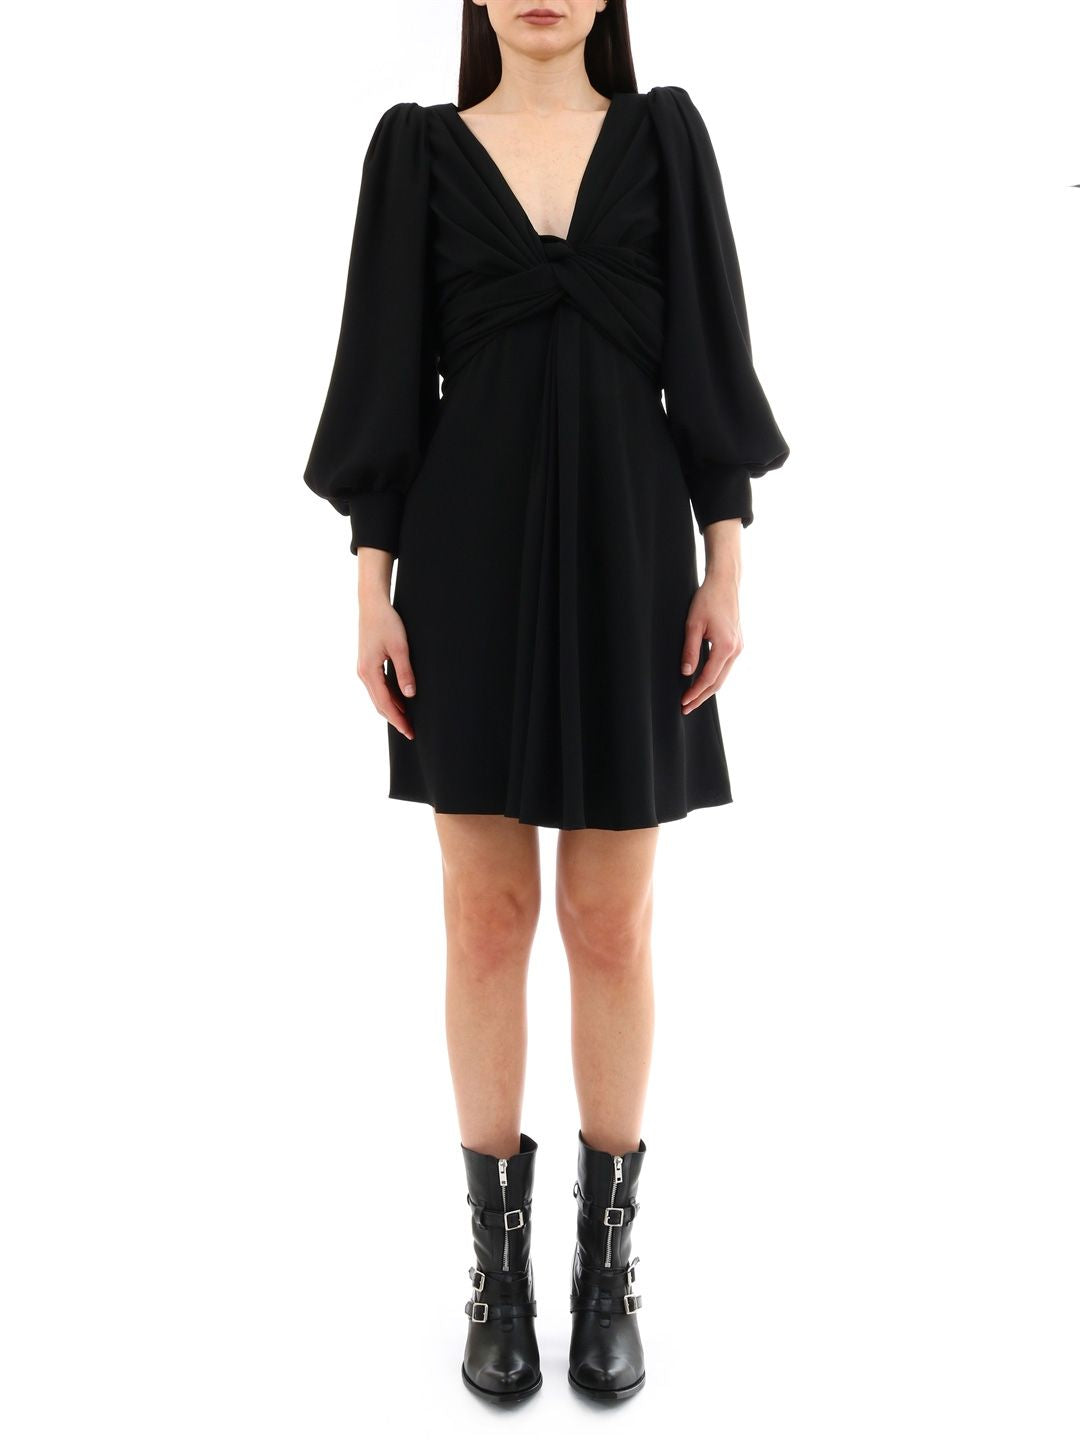 Stylish Black Wrap Dress with V-Neck and Long Sleeves for Women